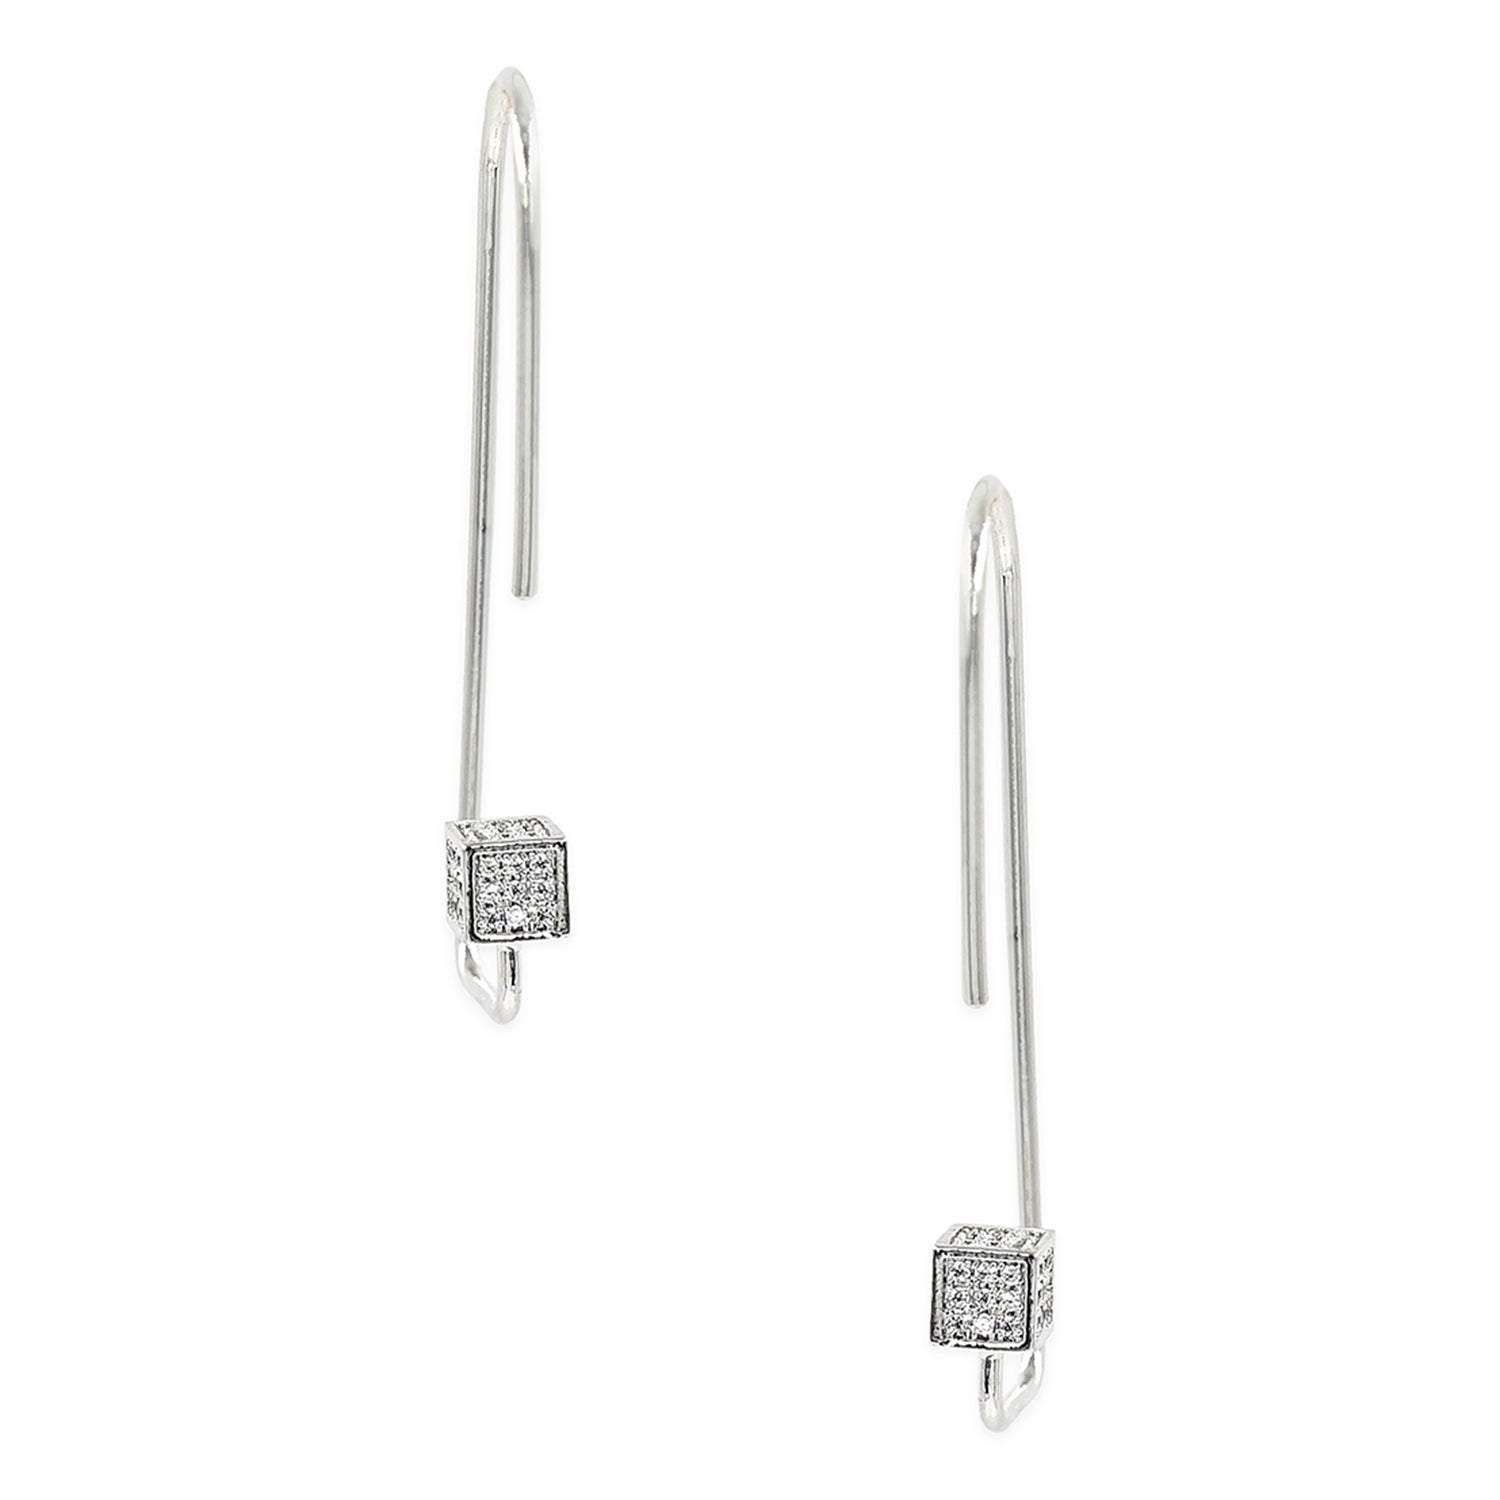 Stylish Silver Plated Earrings